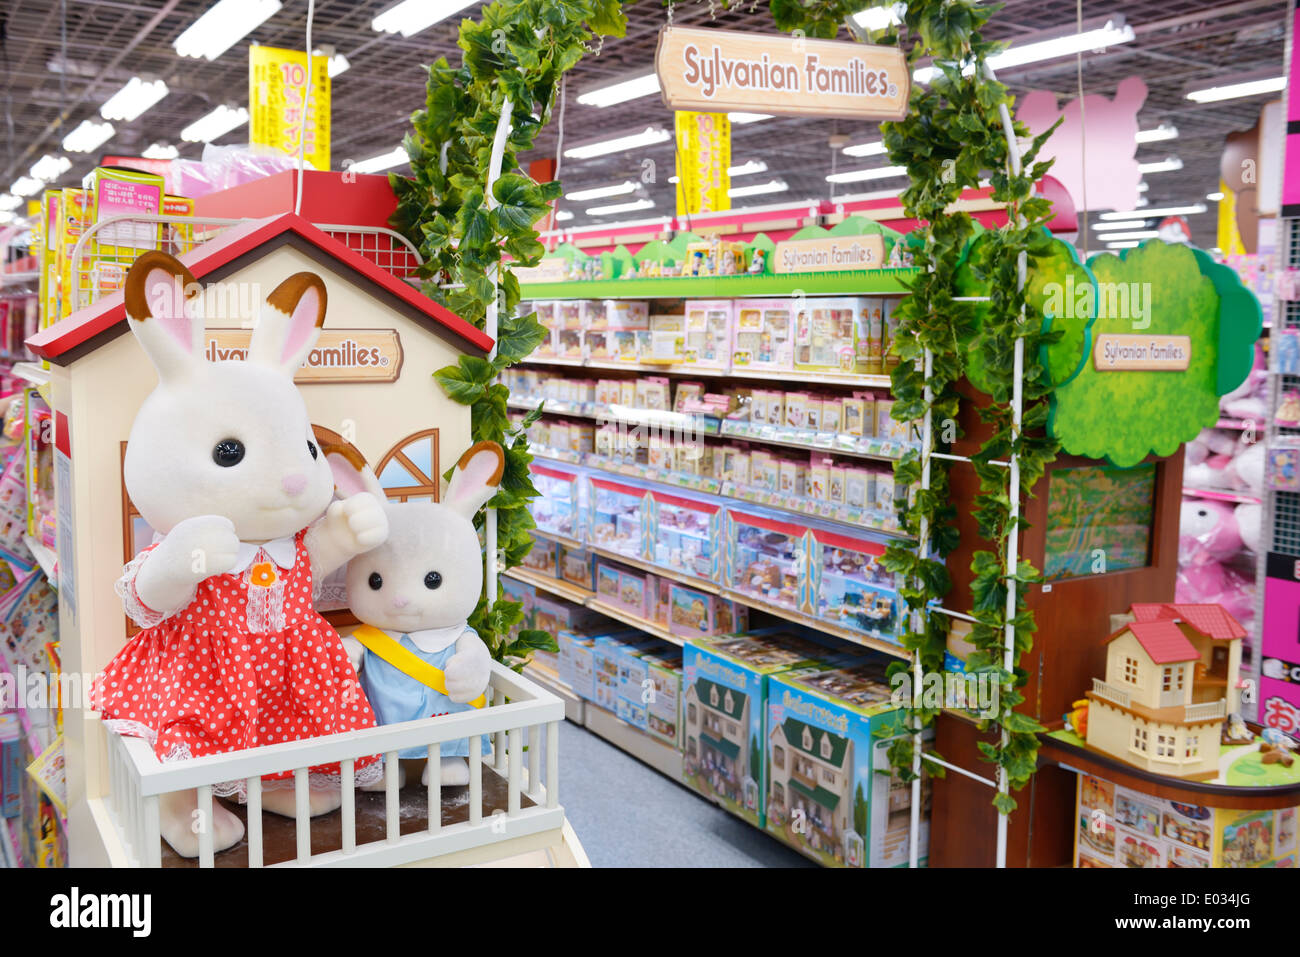 Sylvanian Families cute collectible toys on a store display in Tokyo, Japan. Stock Photo